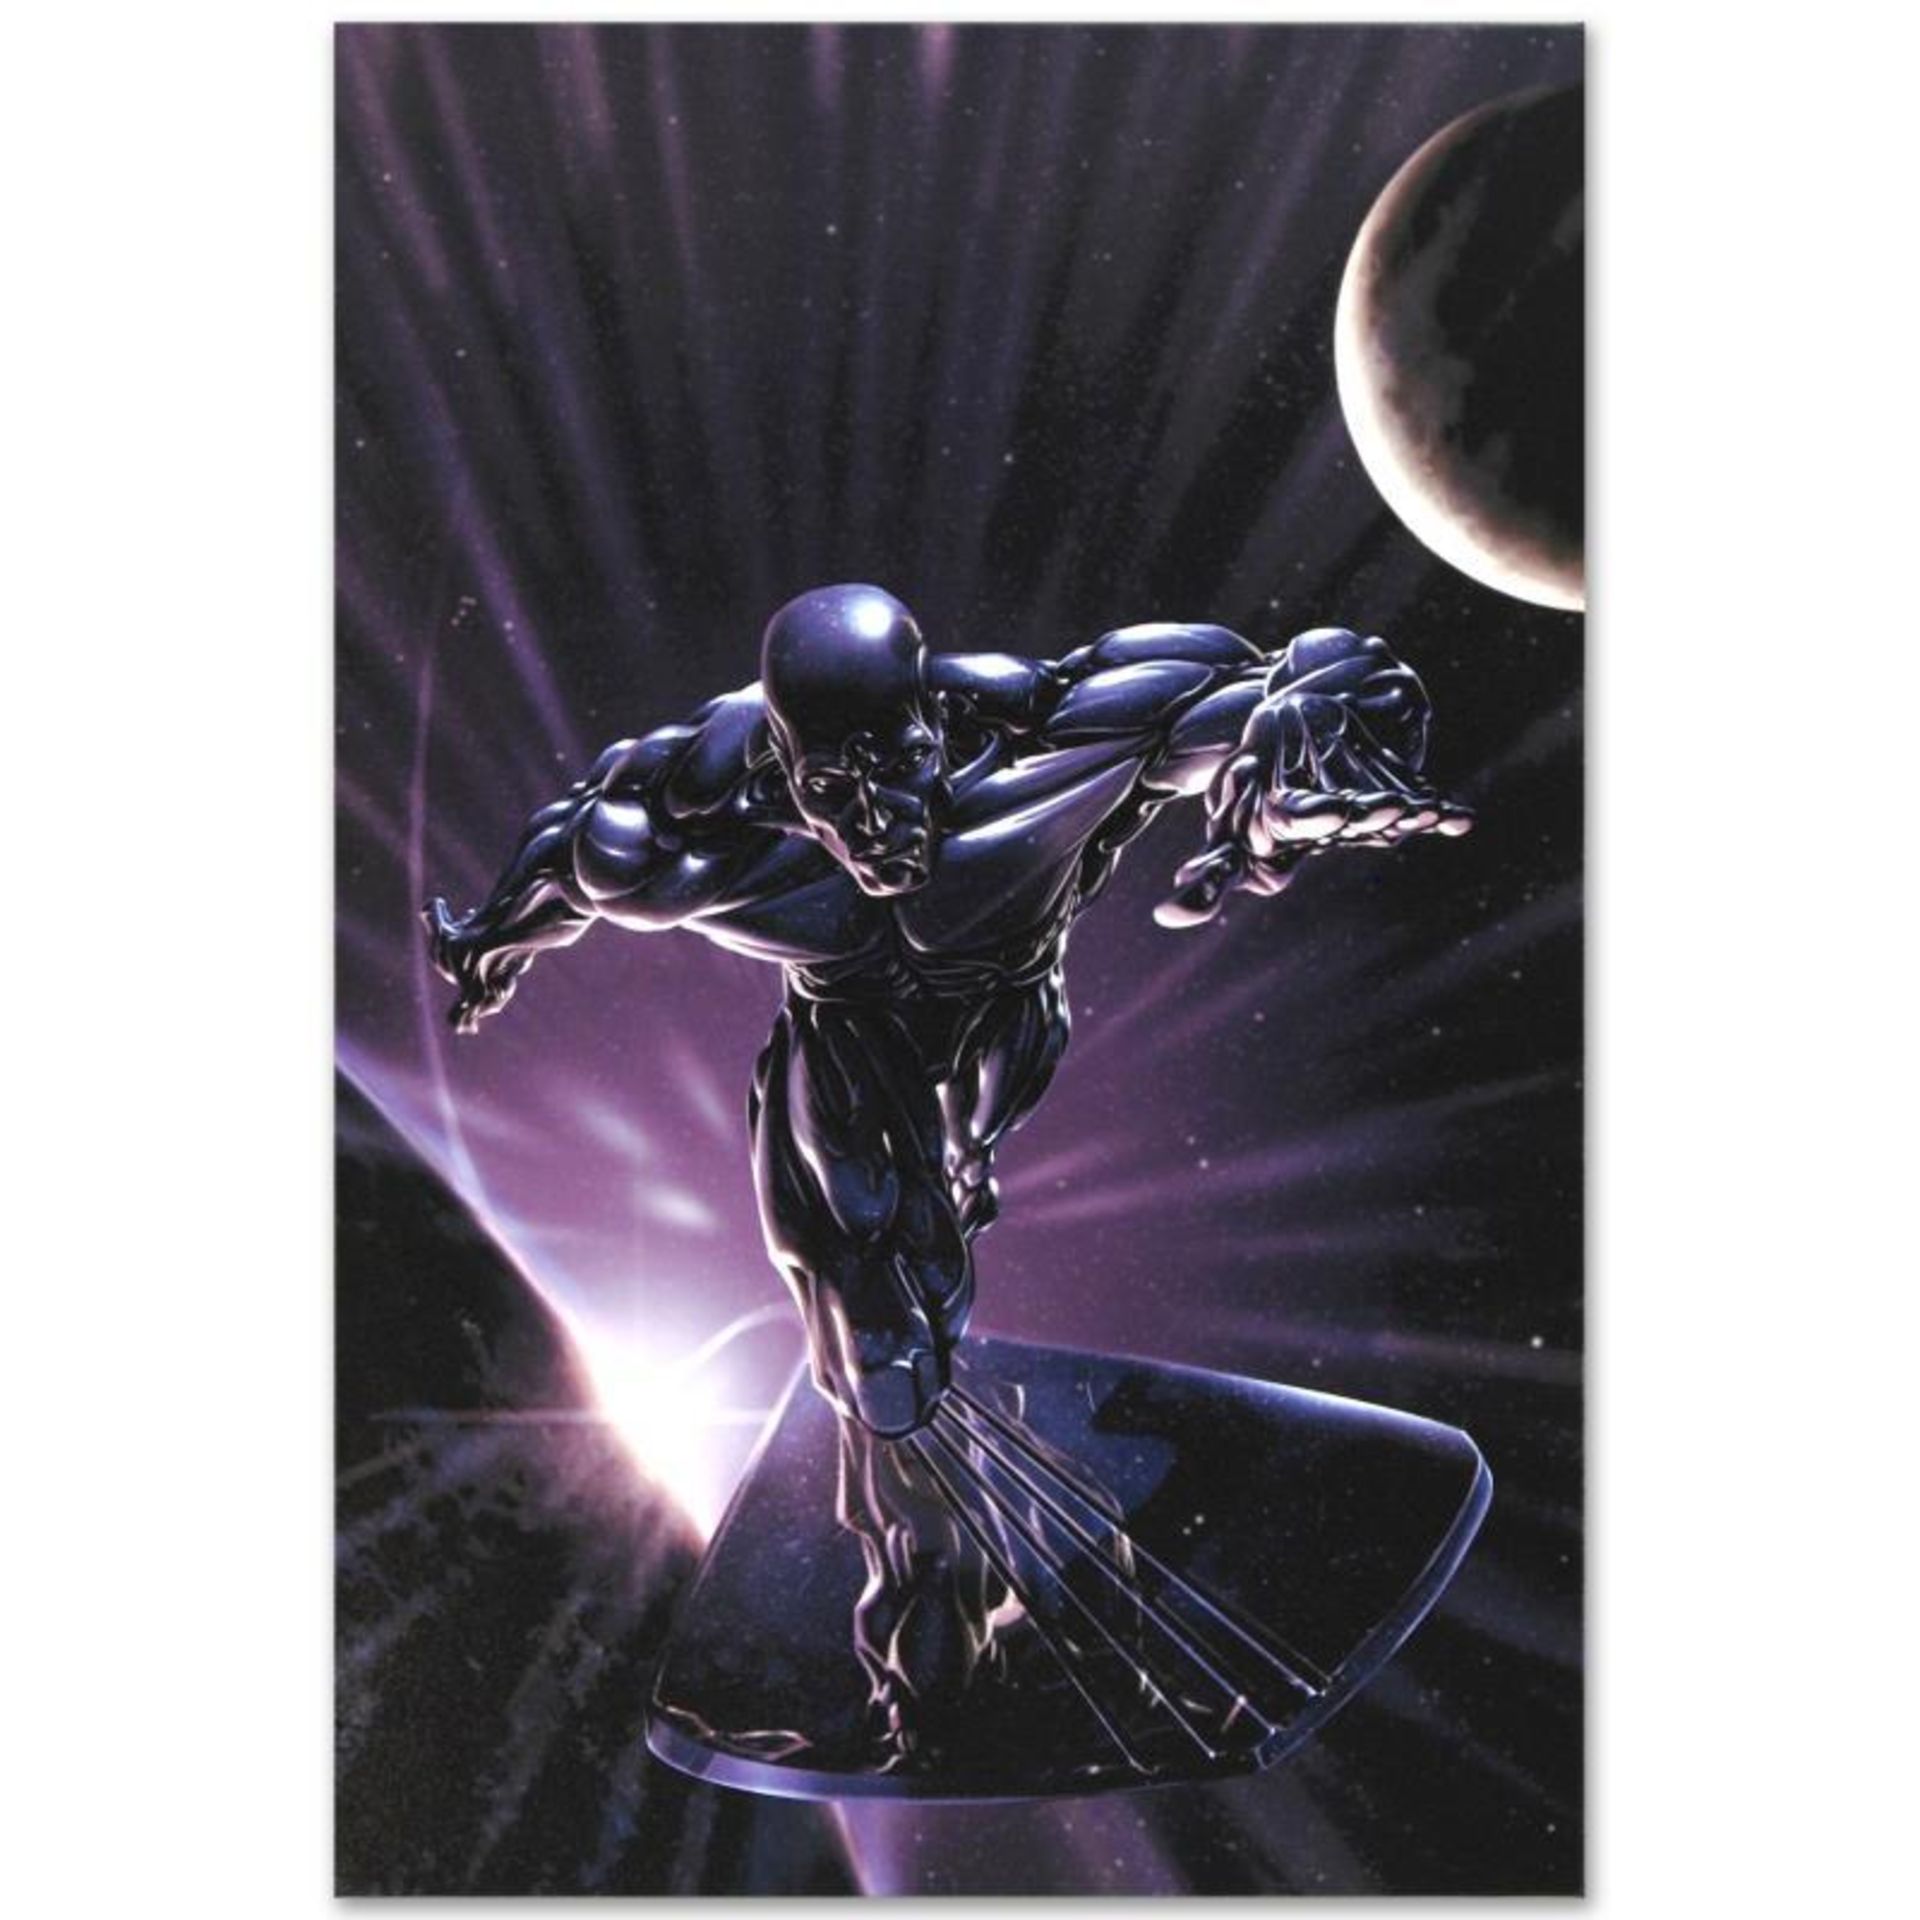 Marvel Comics "Silver Surfer #10" Numbered Limited Edition Giclee on Canvas by C